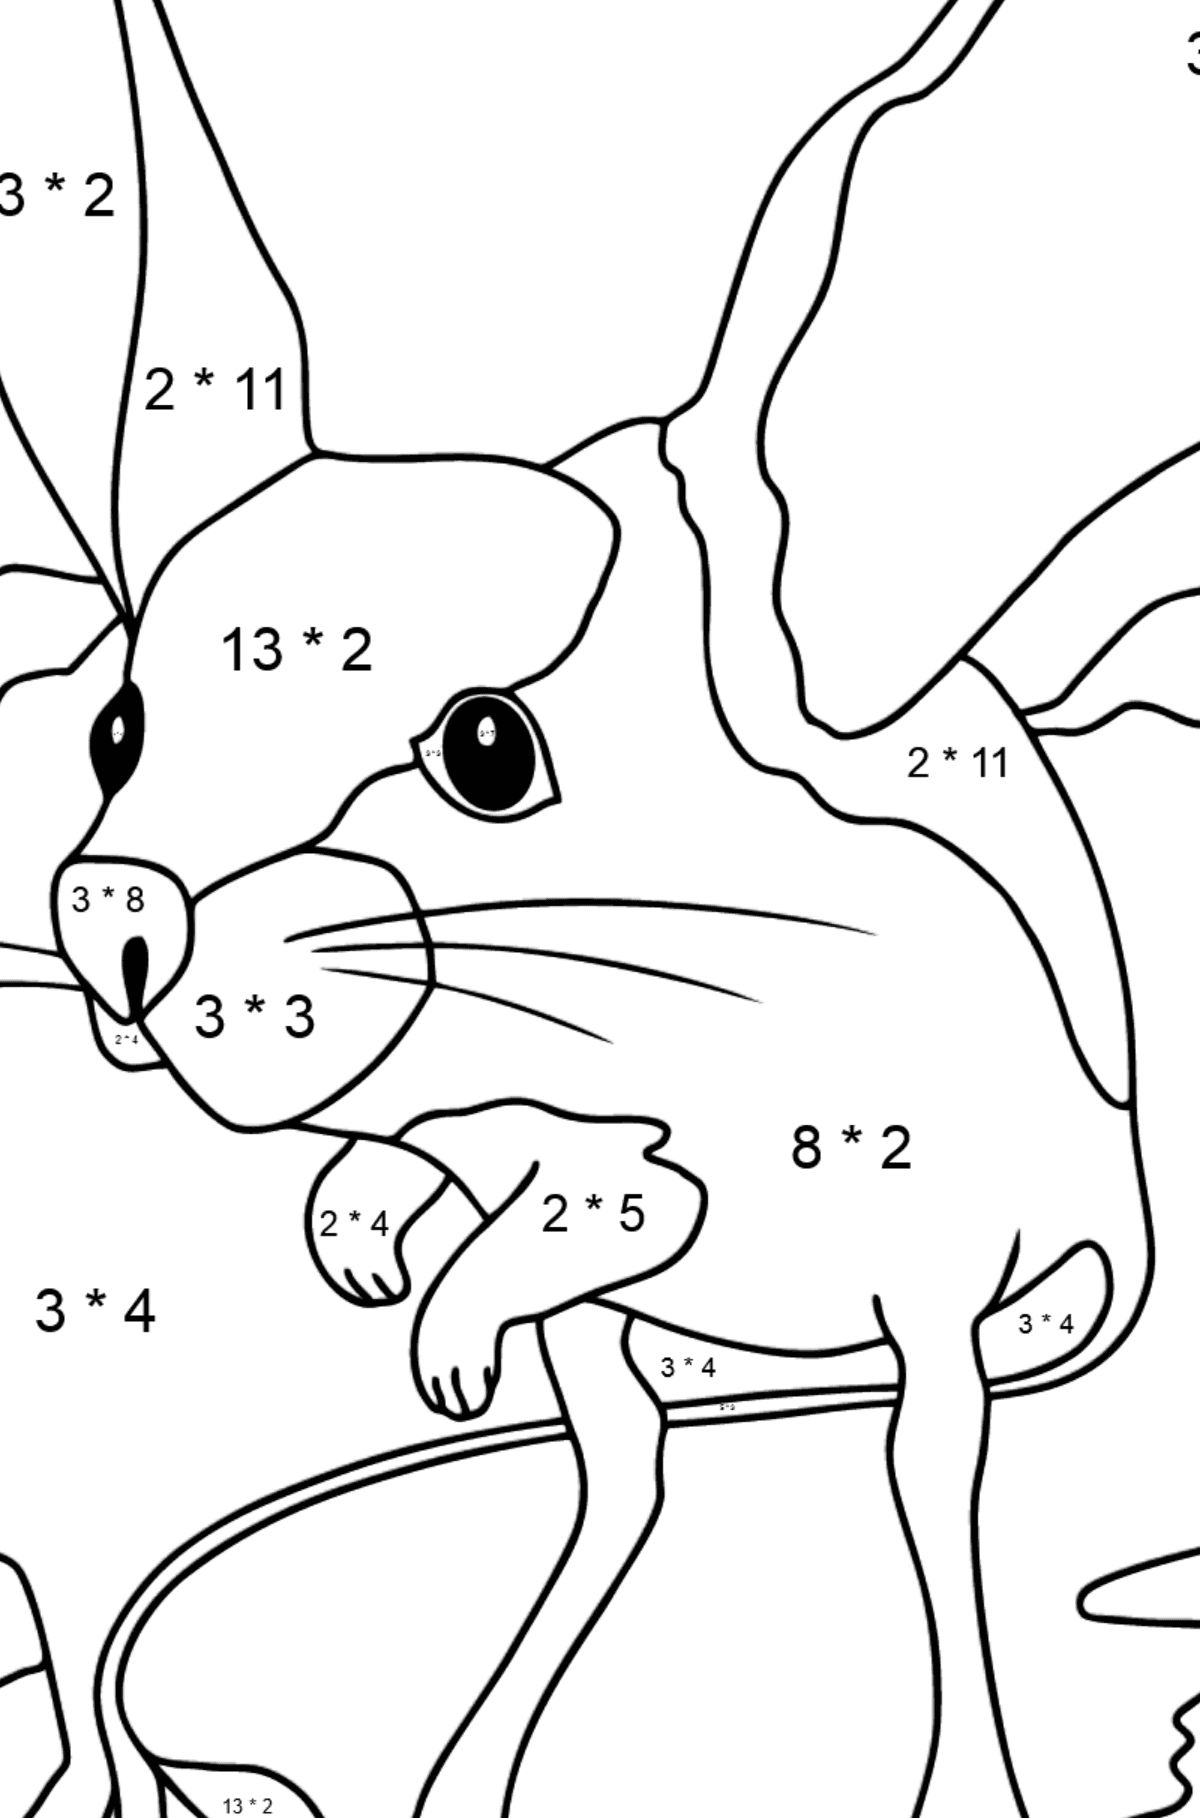 A Jerboa is Inspecting the Area Coloring Page - Math Coloring - Multiplication for Kids